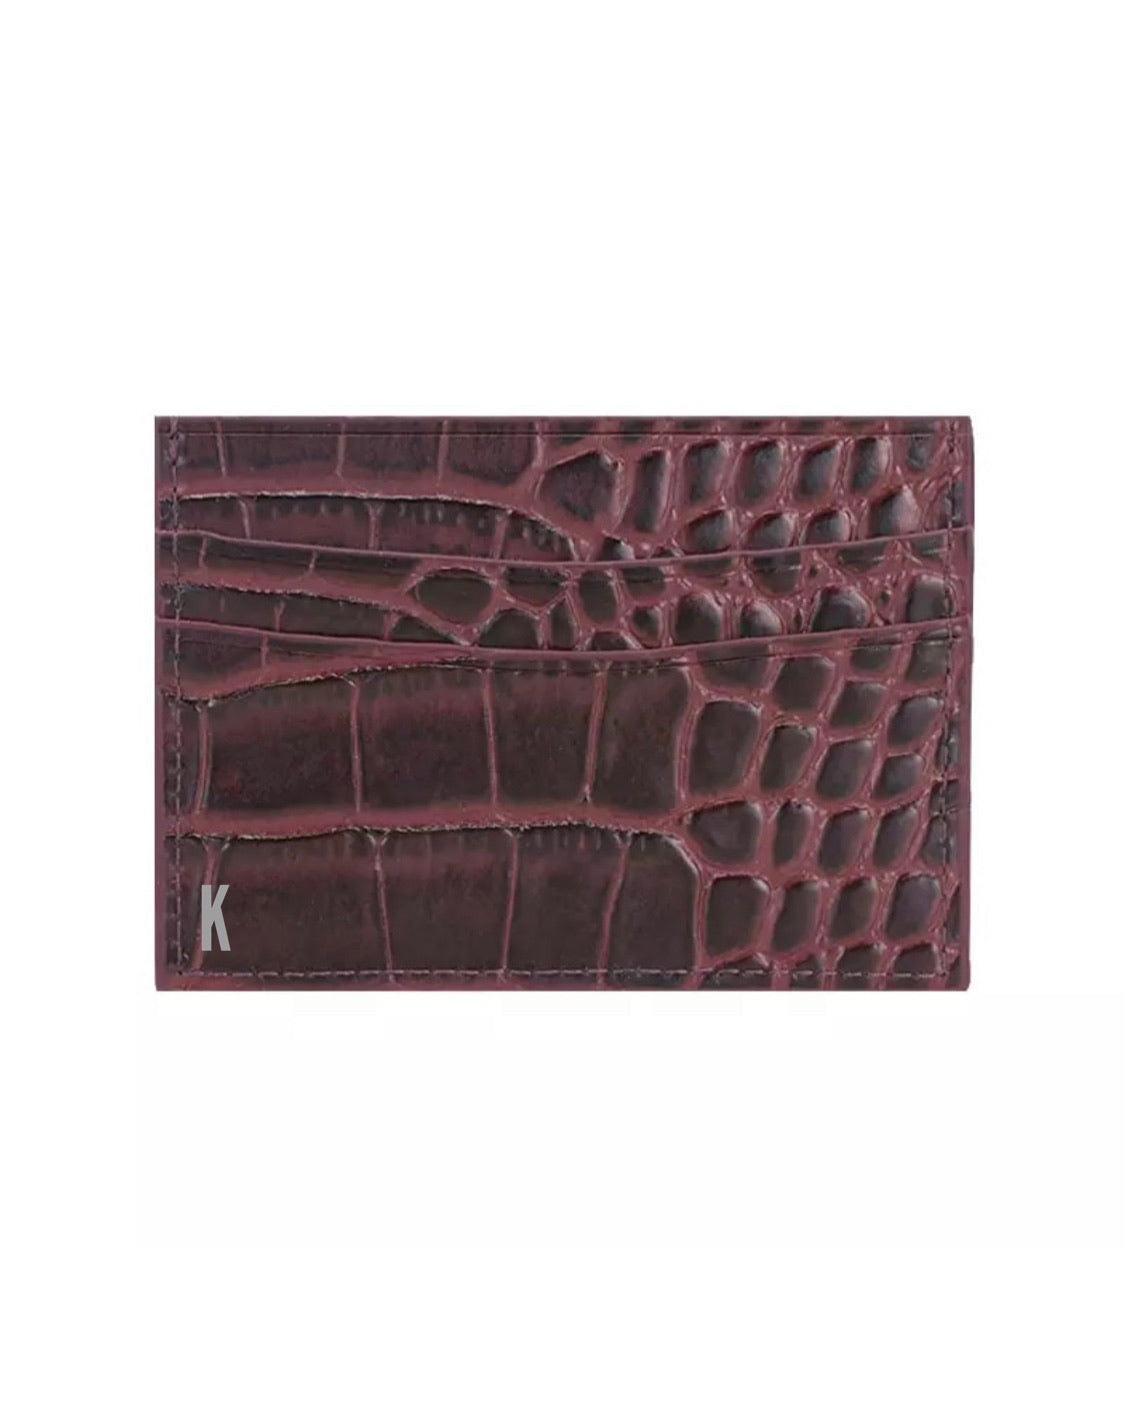 (Made-to-order) Deep Bordeaux Croc  Embossed Vegan Leather Card Case